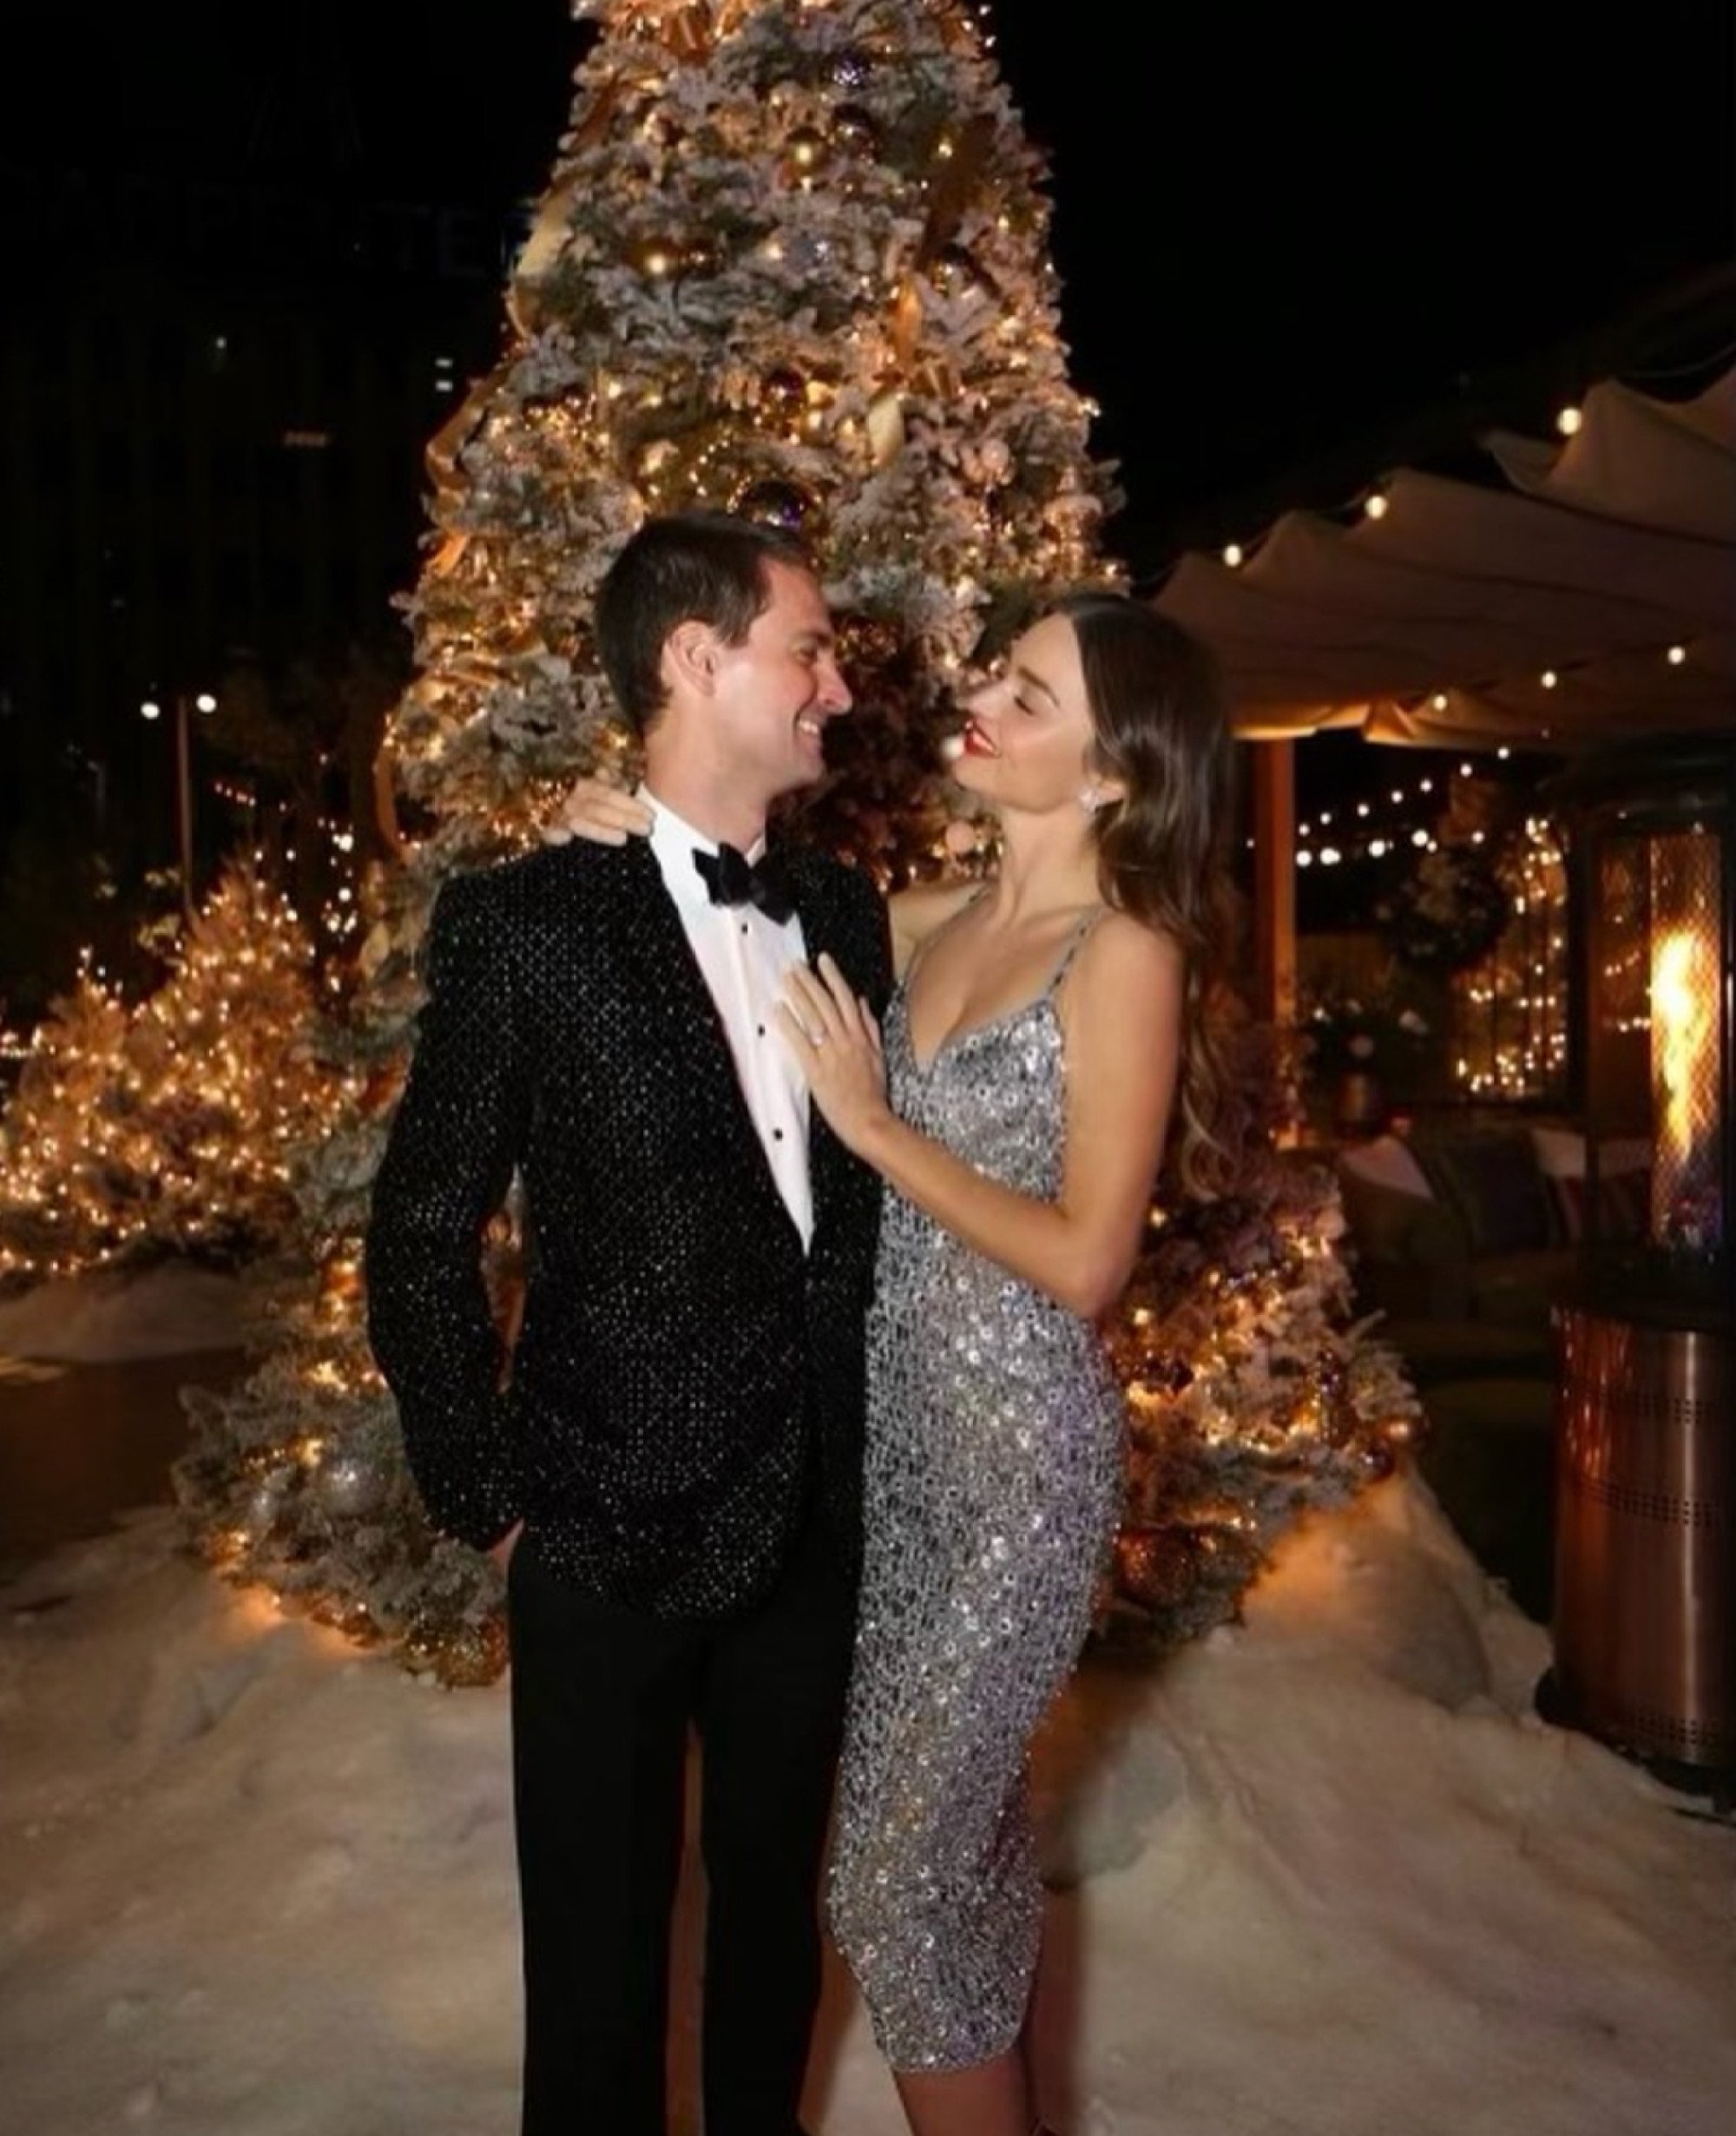 Inside Evan Spiegel and Miranda Kerr's US$3.4 billion lifestyle: the  Snapchat CEO and former Victoria's Secret model splashed US$120 million on  a new mansion, and enjoy designer fashion and fast cars